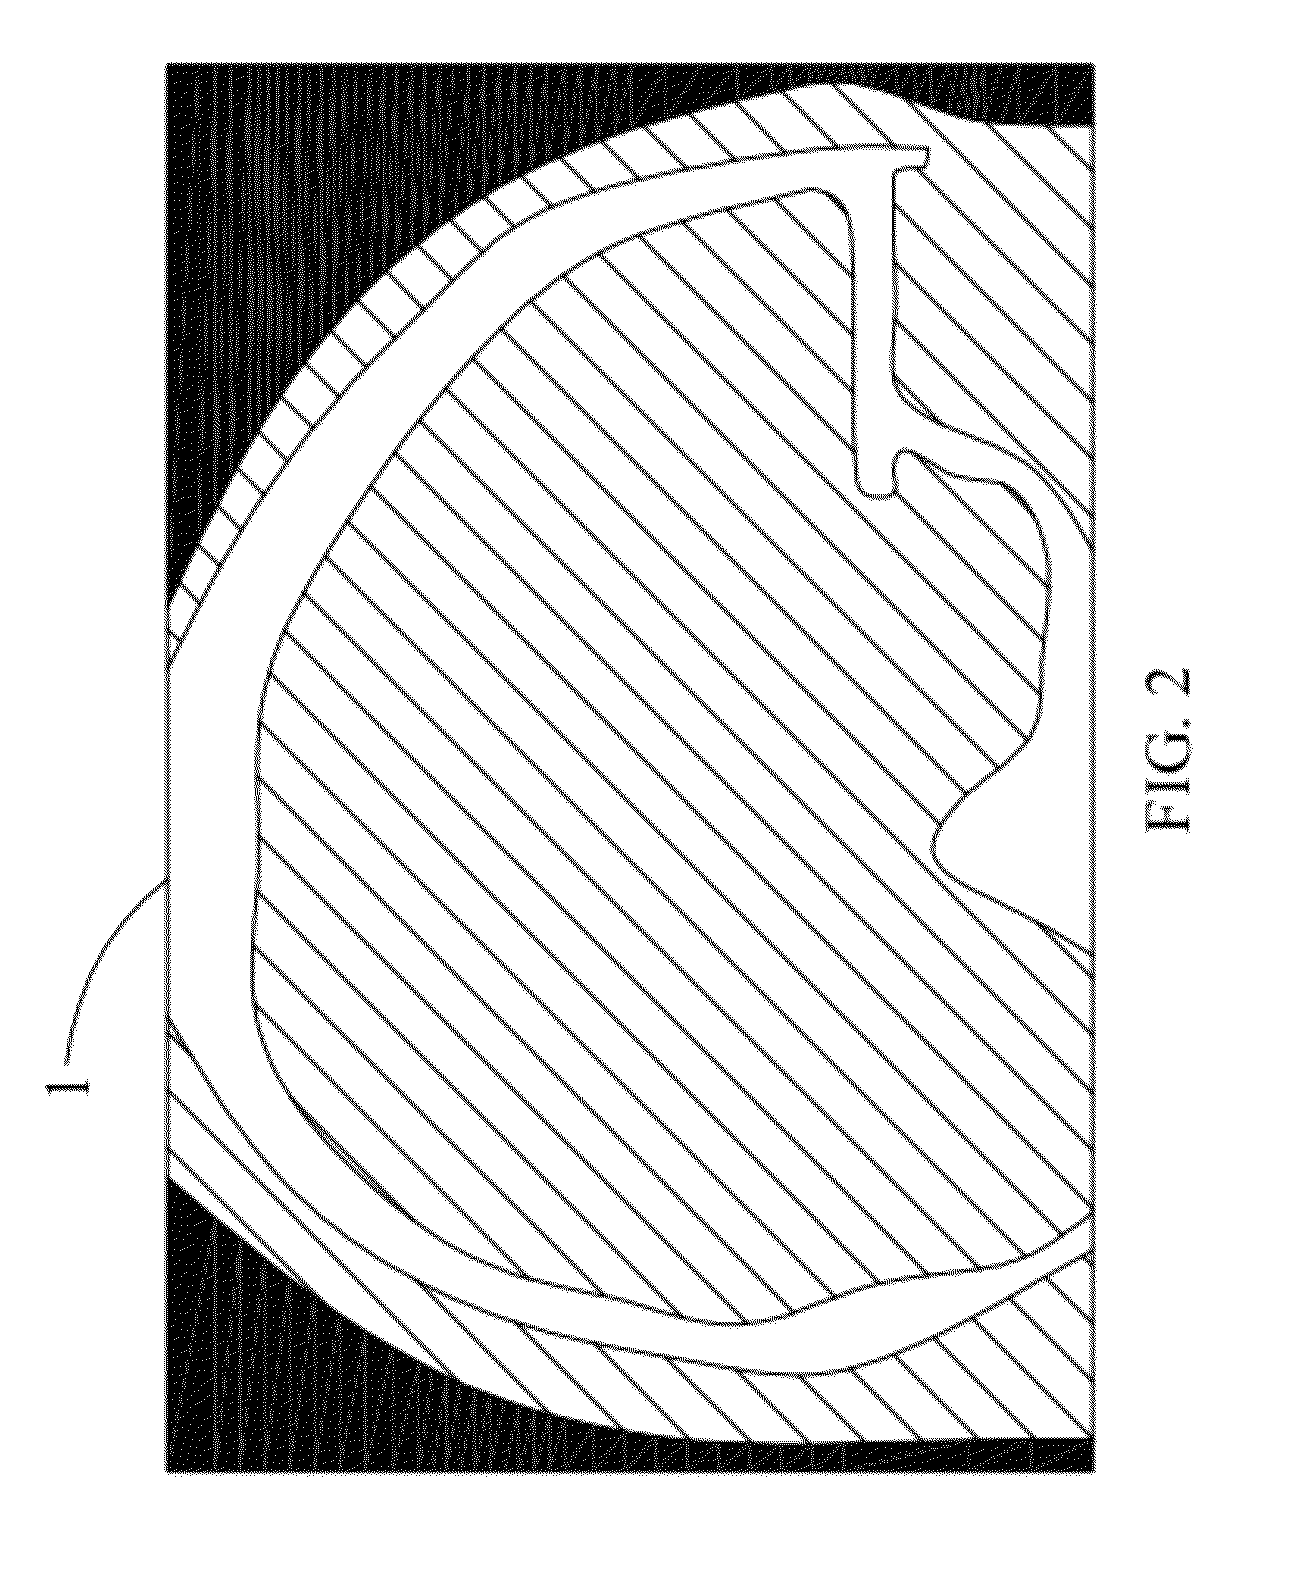 Method for manufacturing artificial implants